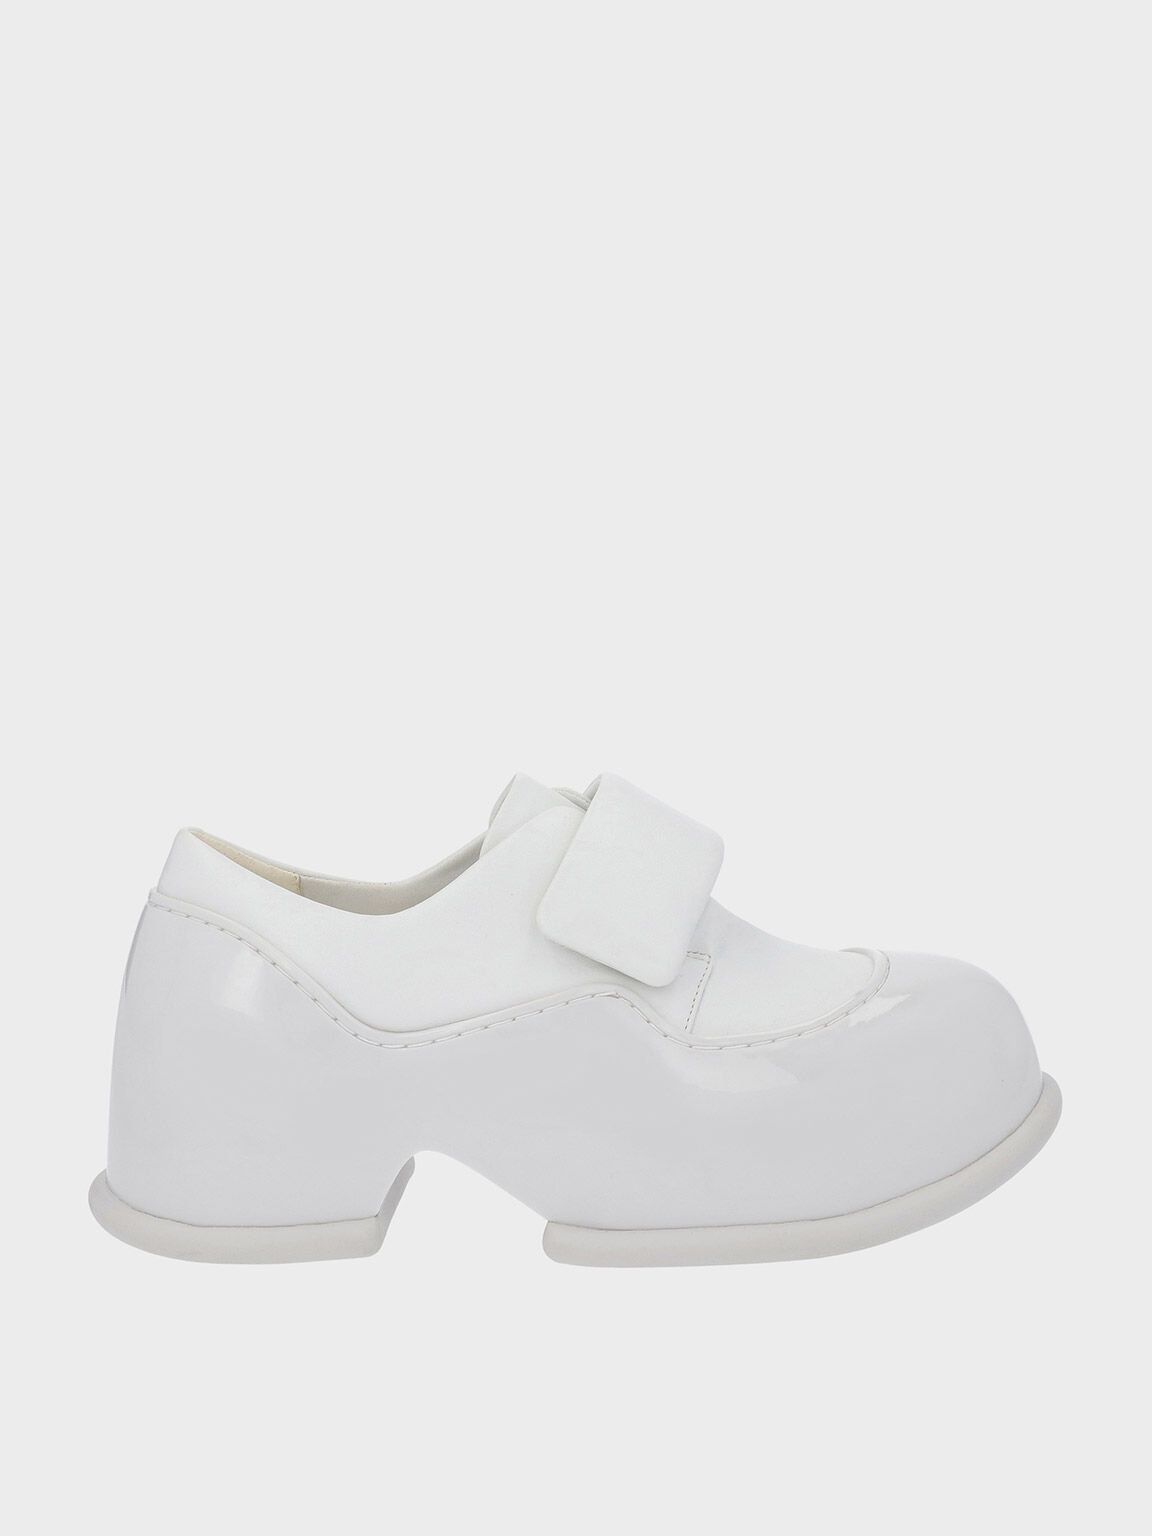 White Pixie Patent Platform Loafers - CHARLES & KEITH DK